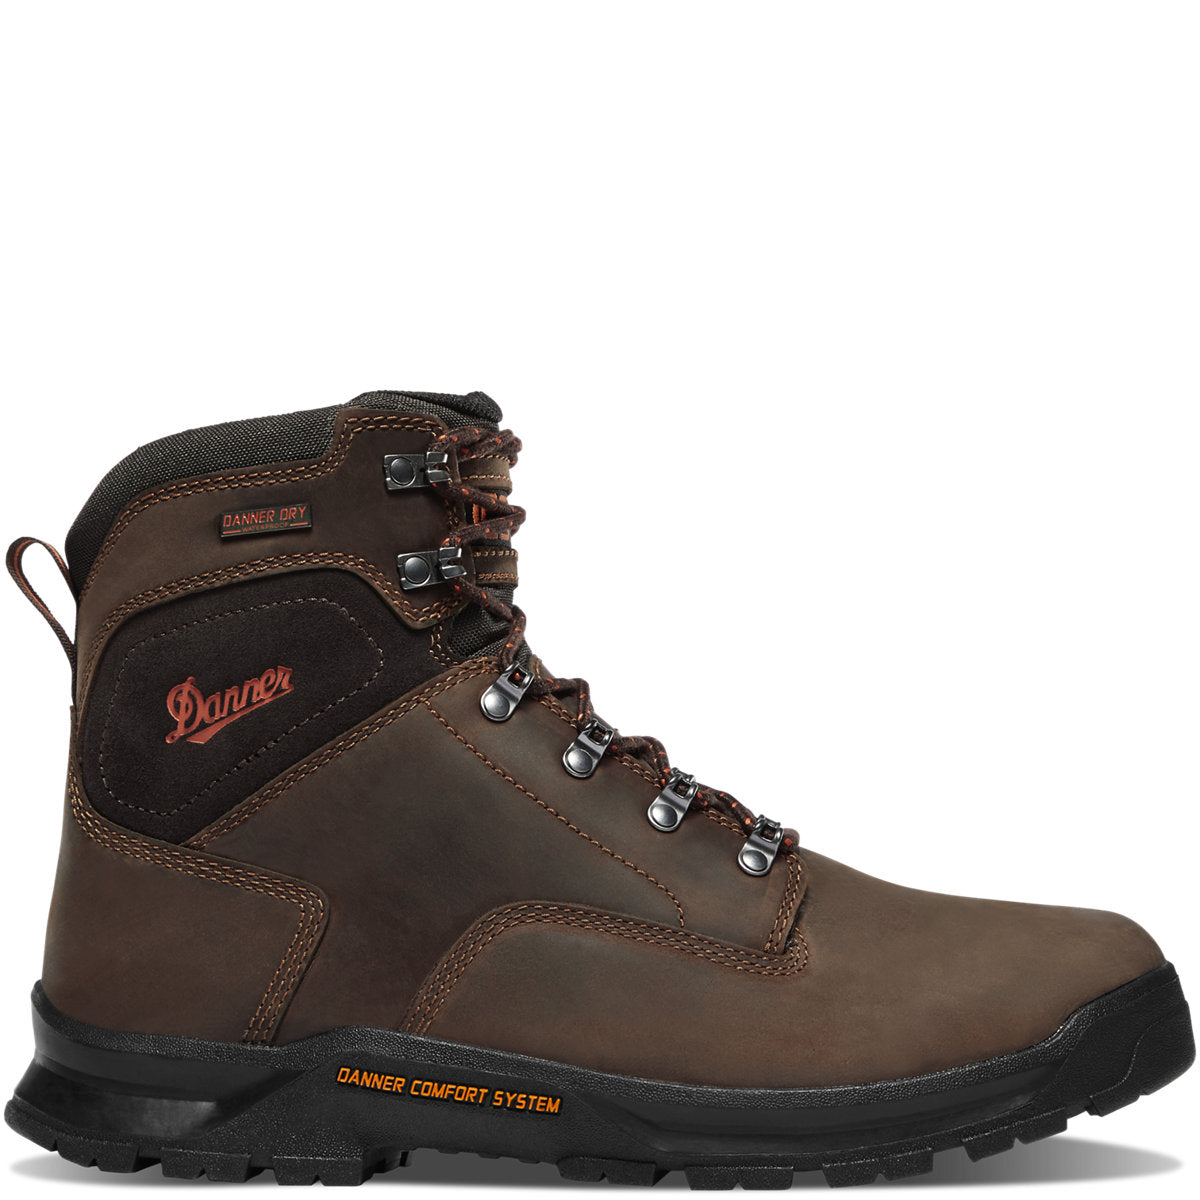 Danner Crafter 6' Composite Toe Work Boots - 88 Gear